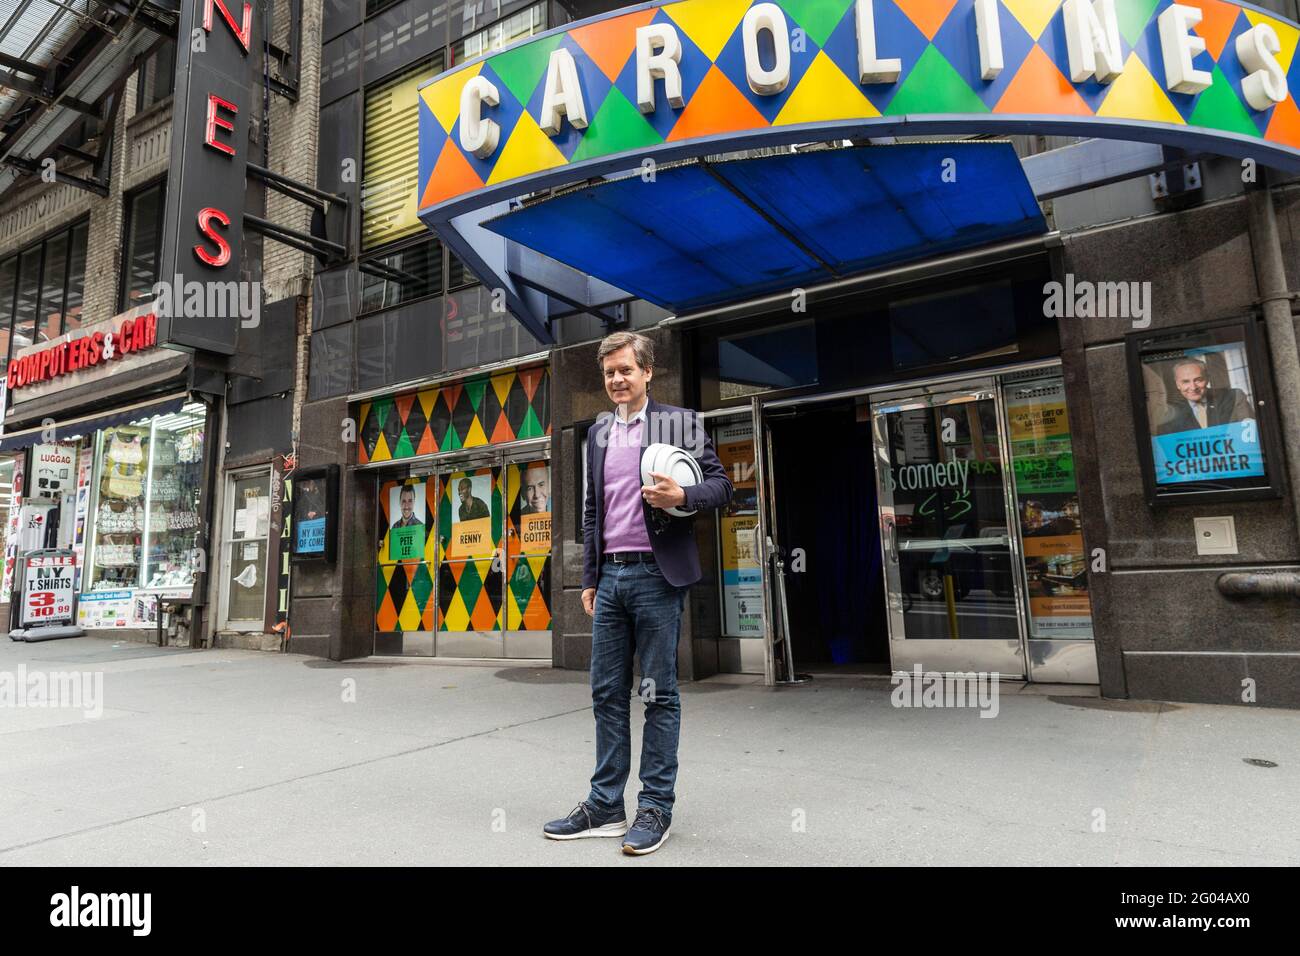 New York, NY - May 31, 2021: State Senator Brad Hoylman arrives for Carolines on Broadway comedy club re-opening after pandemic ceremony Stock Photo